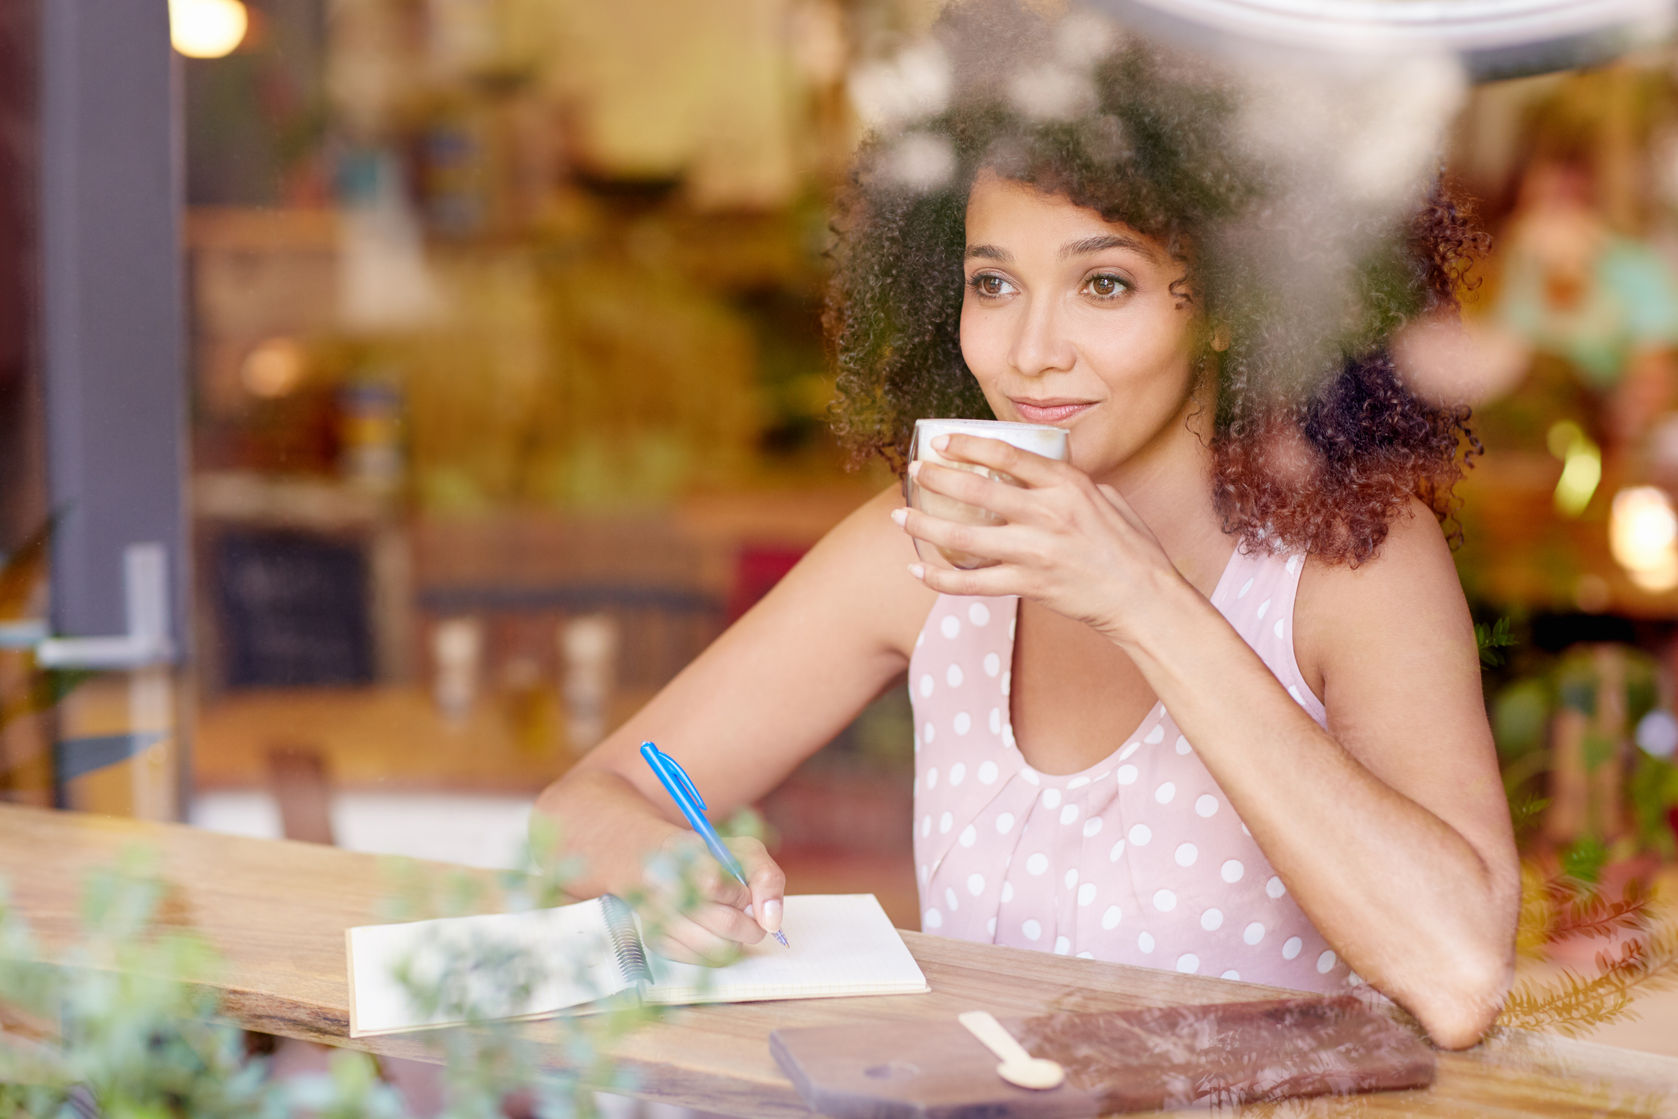 51356875 - beautiful mixed race woman sitting in a coffee shop sipping her latte and daydreaming while gazing out of the window